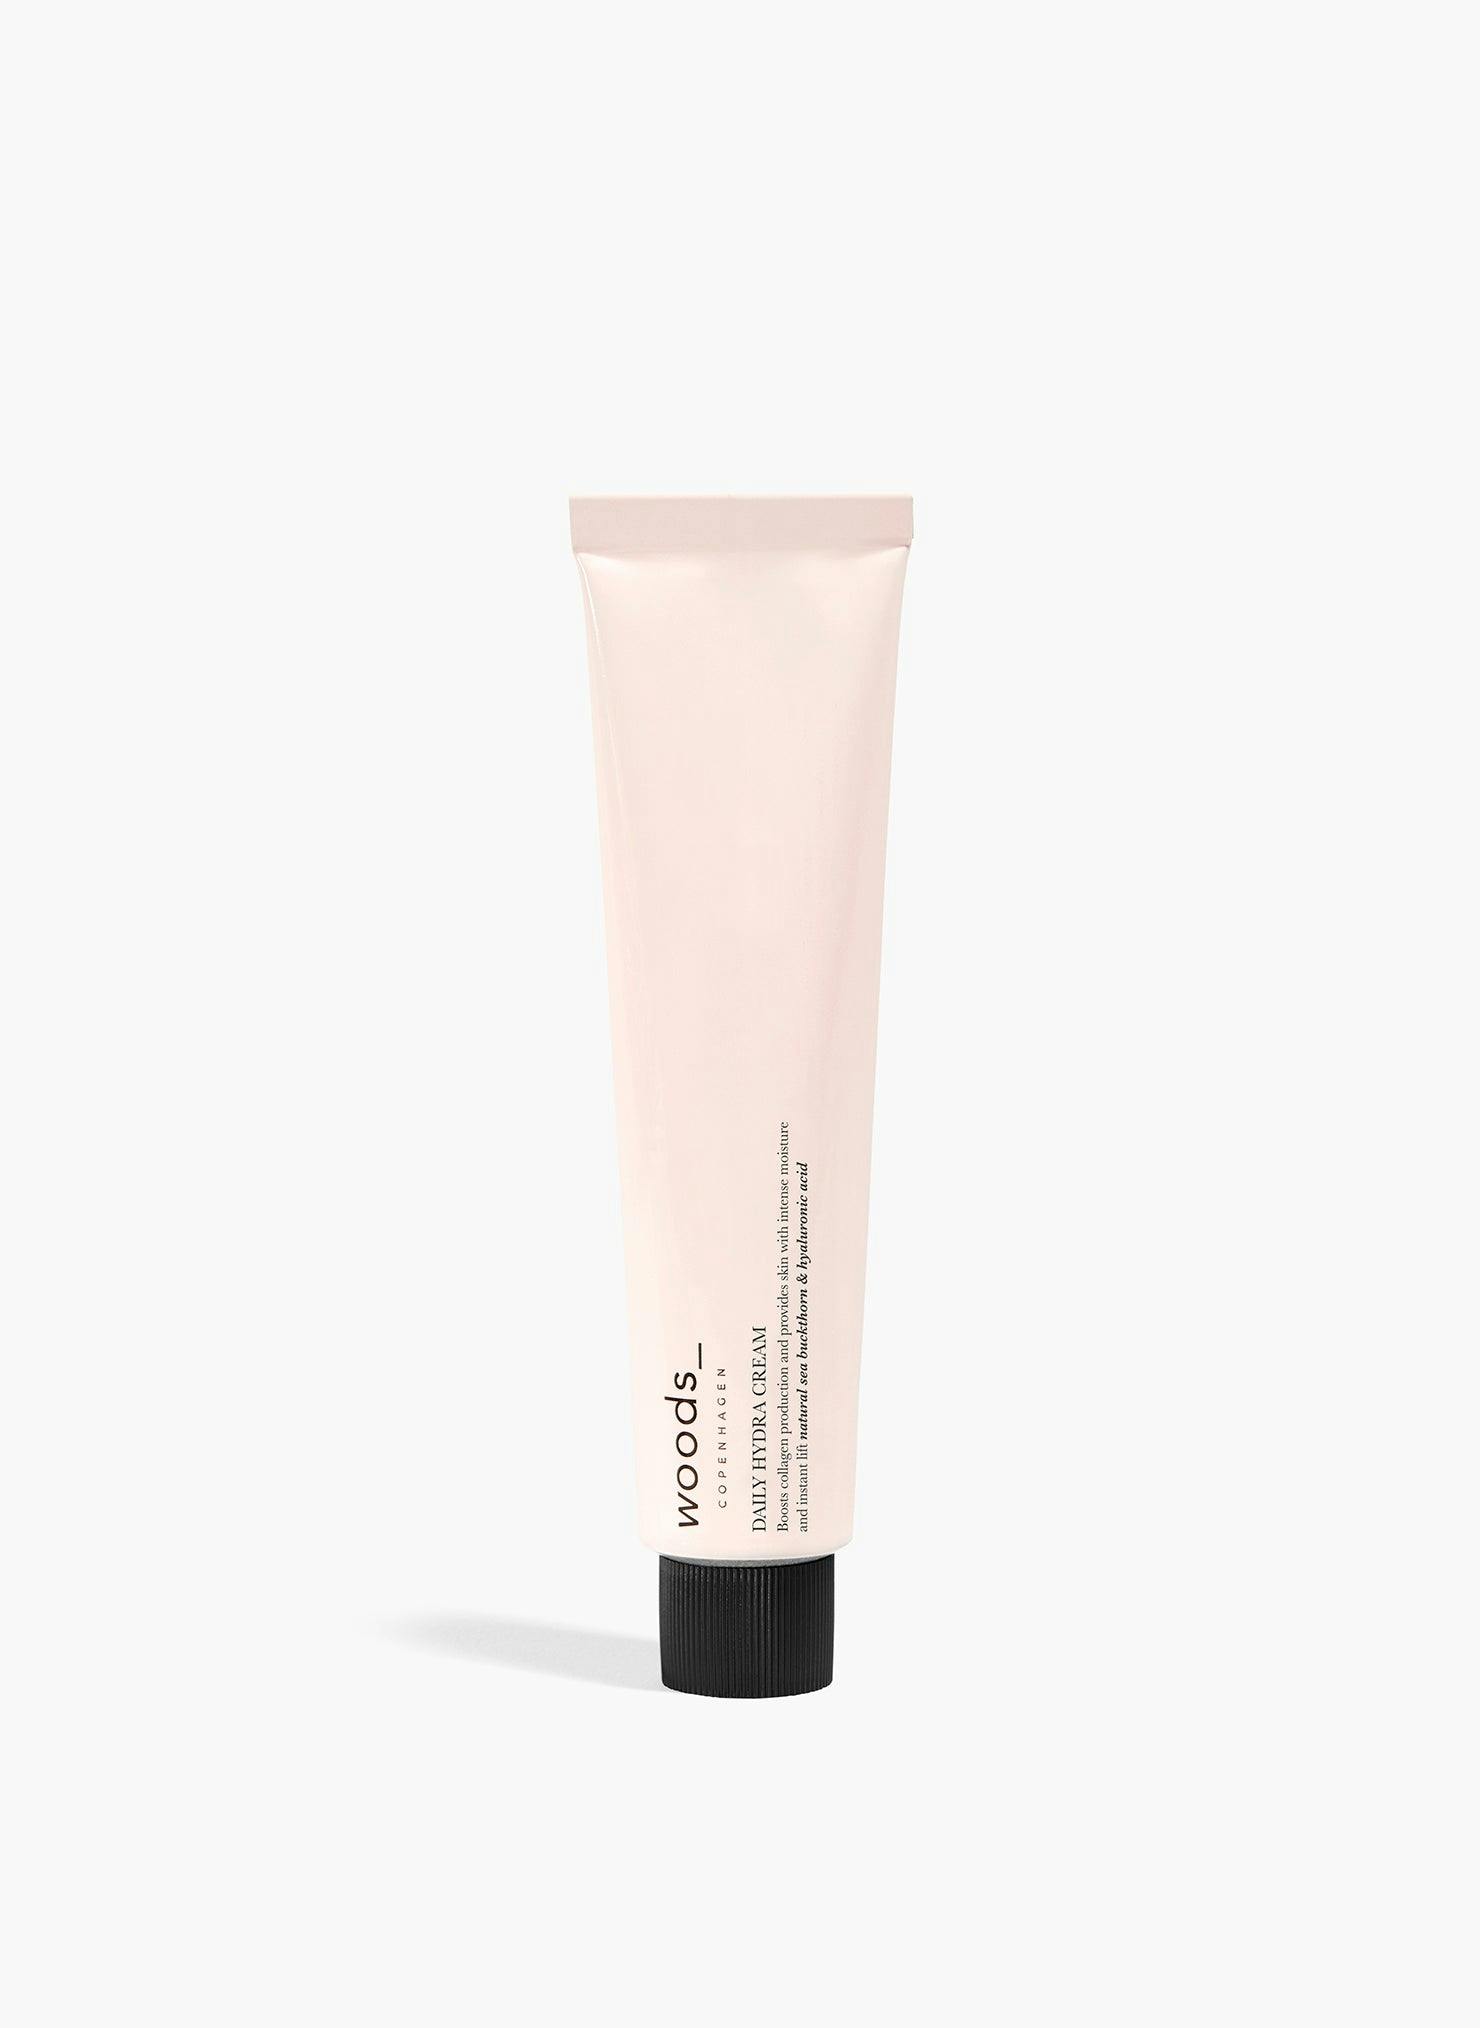 Nordic beauty, hydrating, day cream, pink, new beauty brands, Nordic beauty